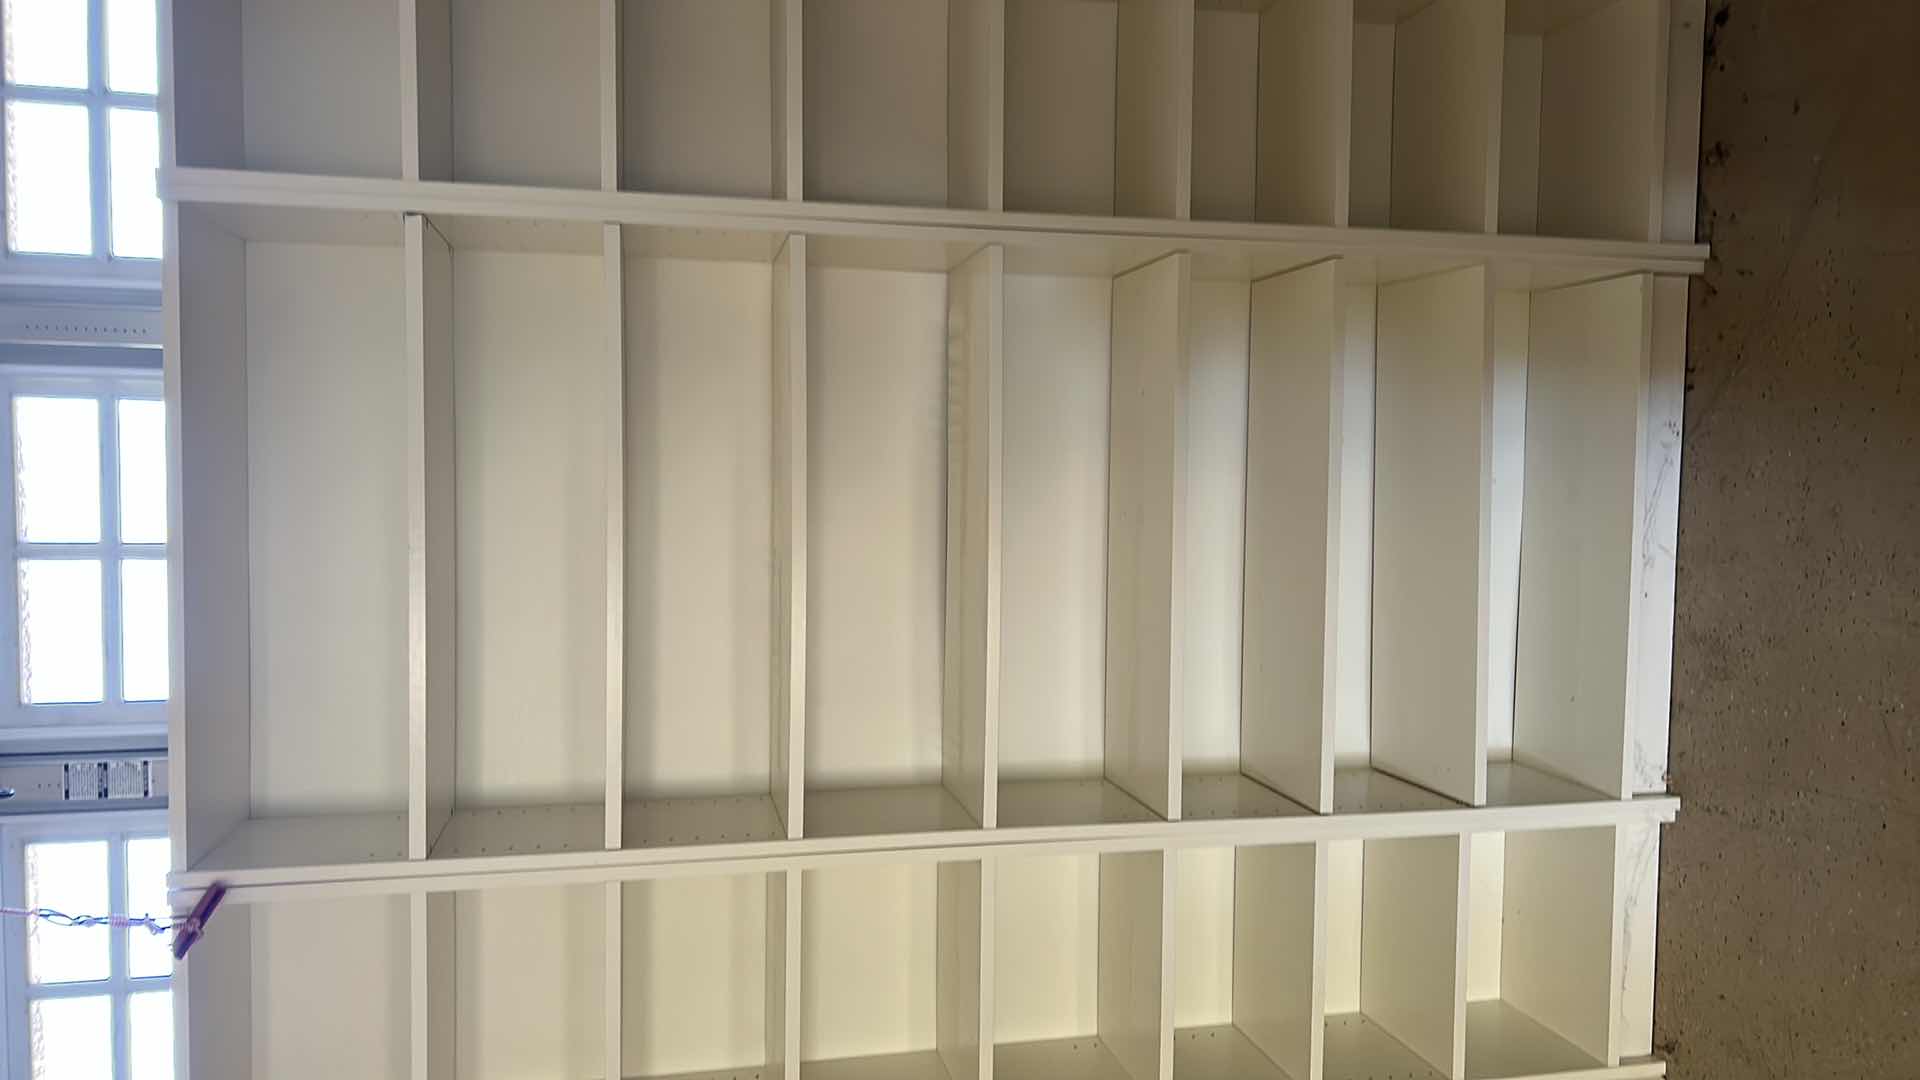 Photo 3 of IKEA WHITE ADJUSTBLE BOOKSHELF 31 1/2“ x 11 1/2“ x H79 1/2“
(CONTENTS NOT INCLUDED)